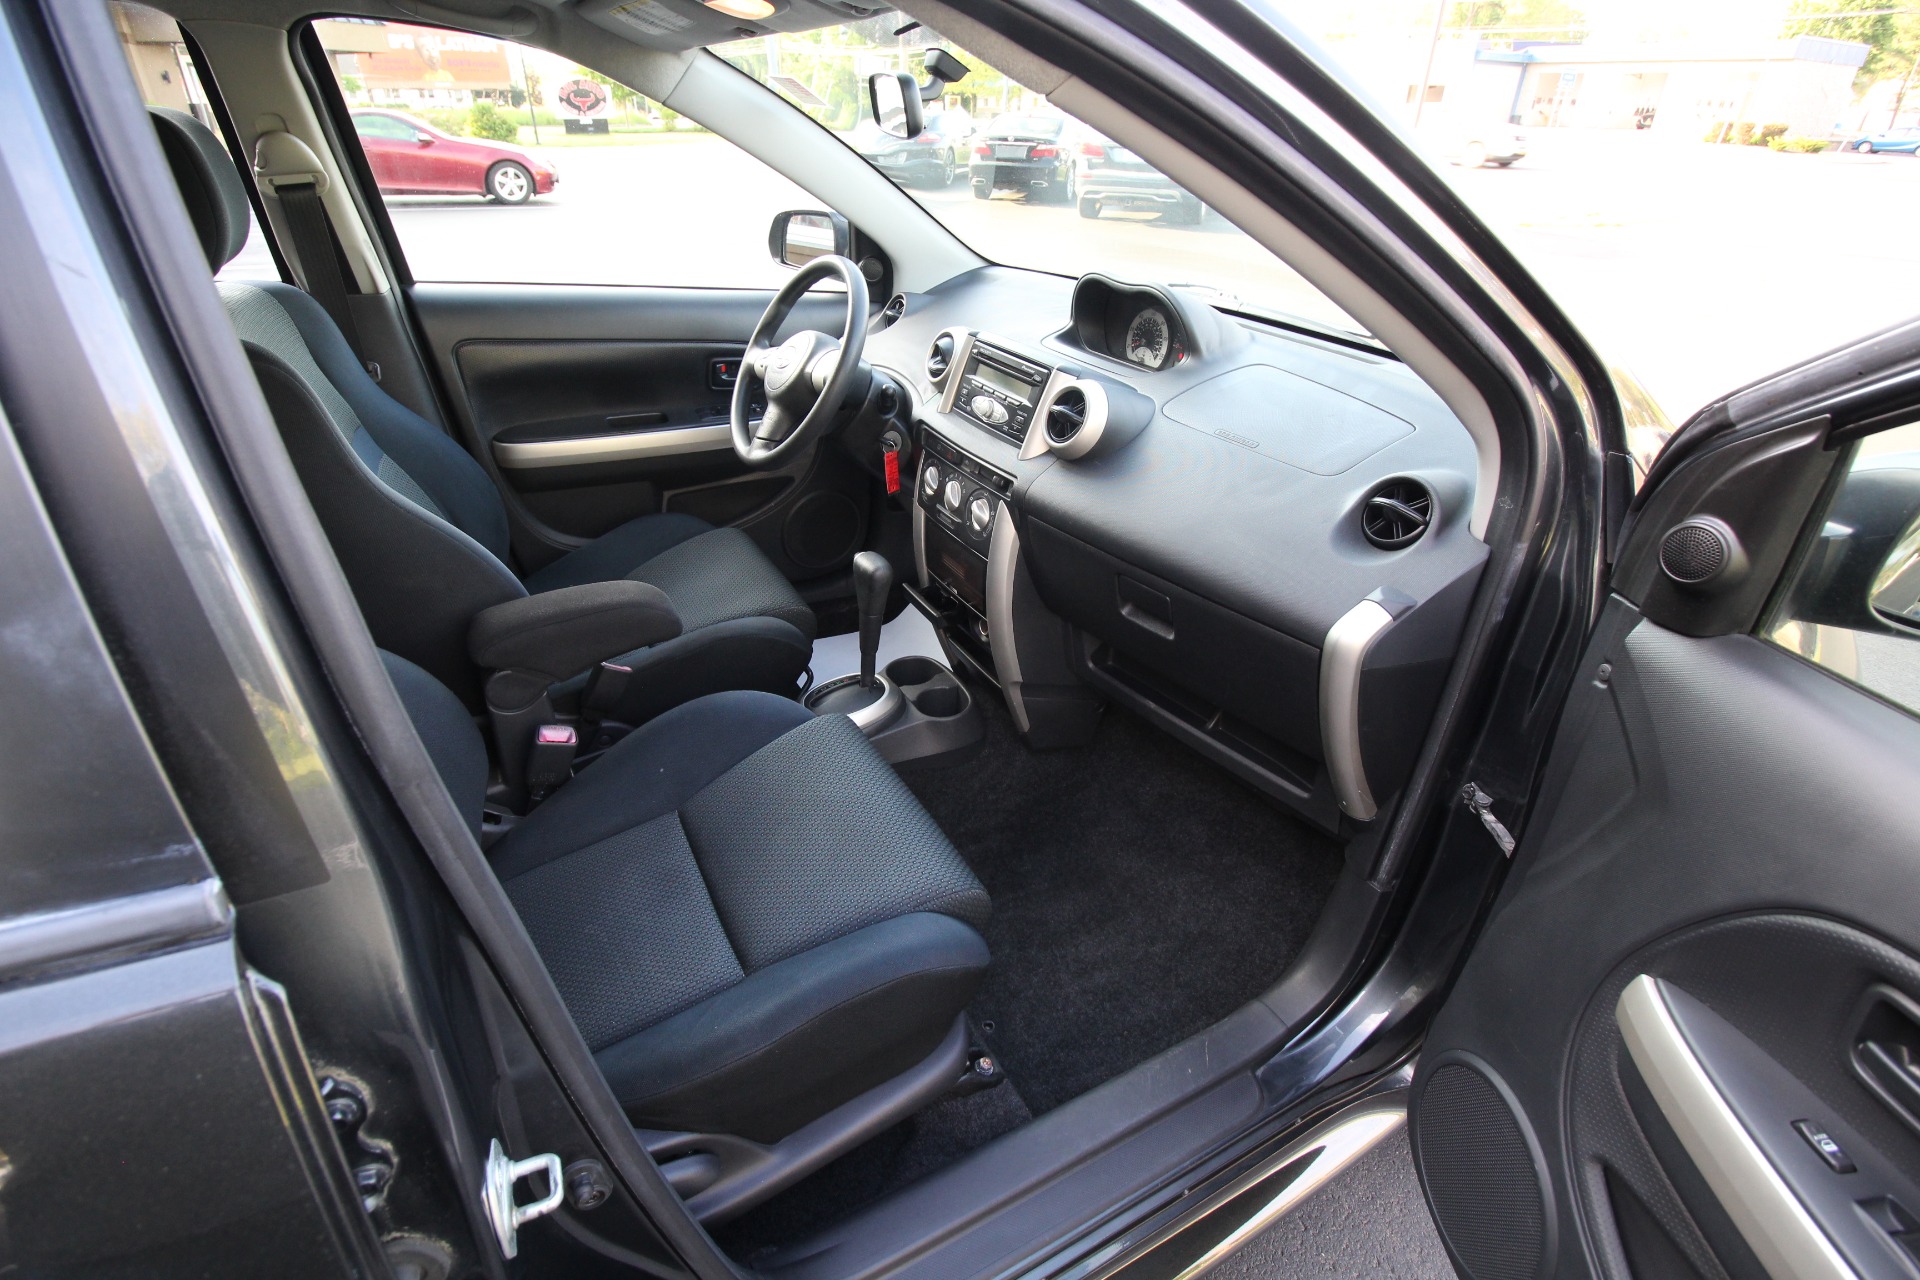 Used 2006 DARK GREY Scion xA Hatchback 1 OWNER NEW CAR TRADE WITH US LOW MILES | Albany, NY